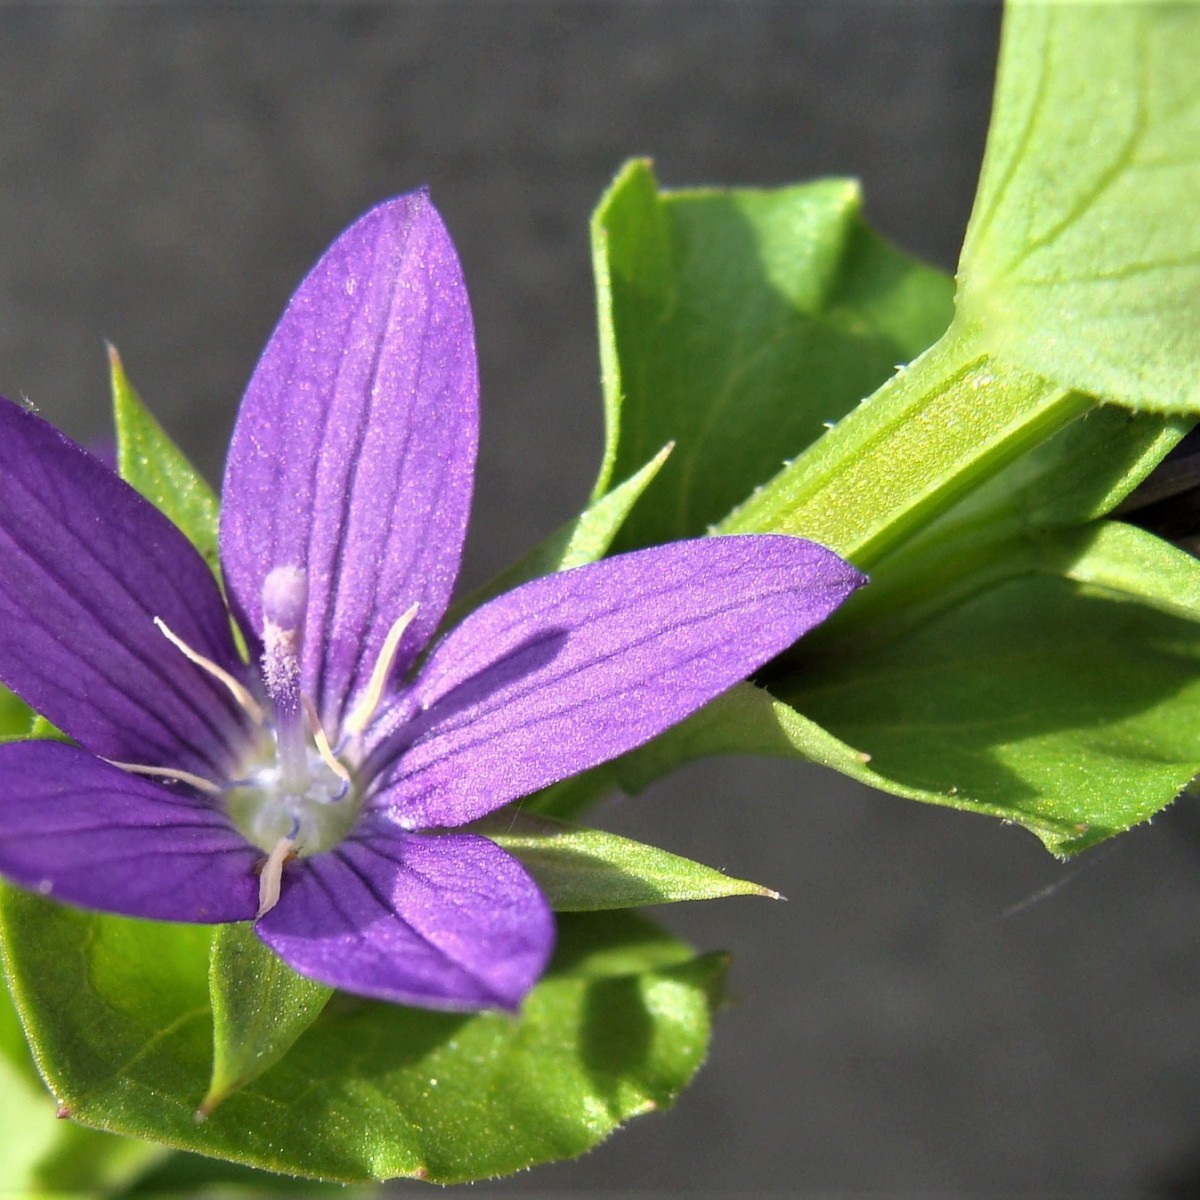 types of purple flowers with 5 petals